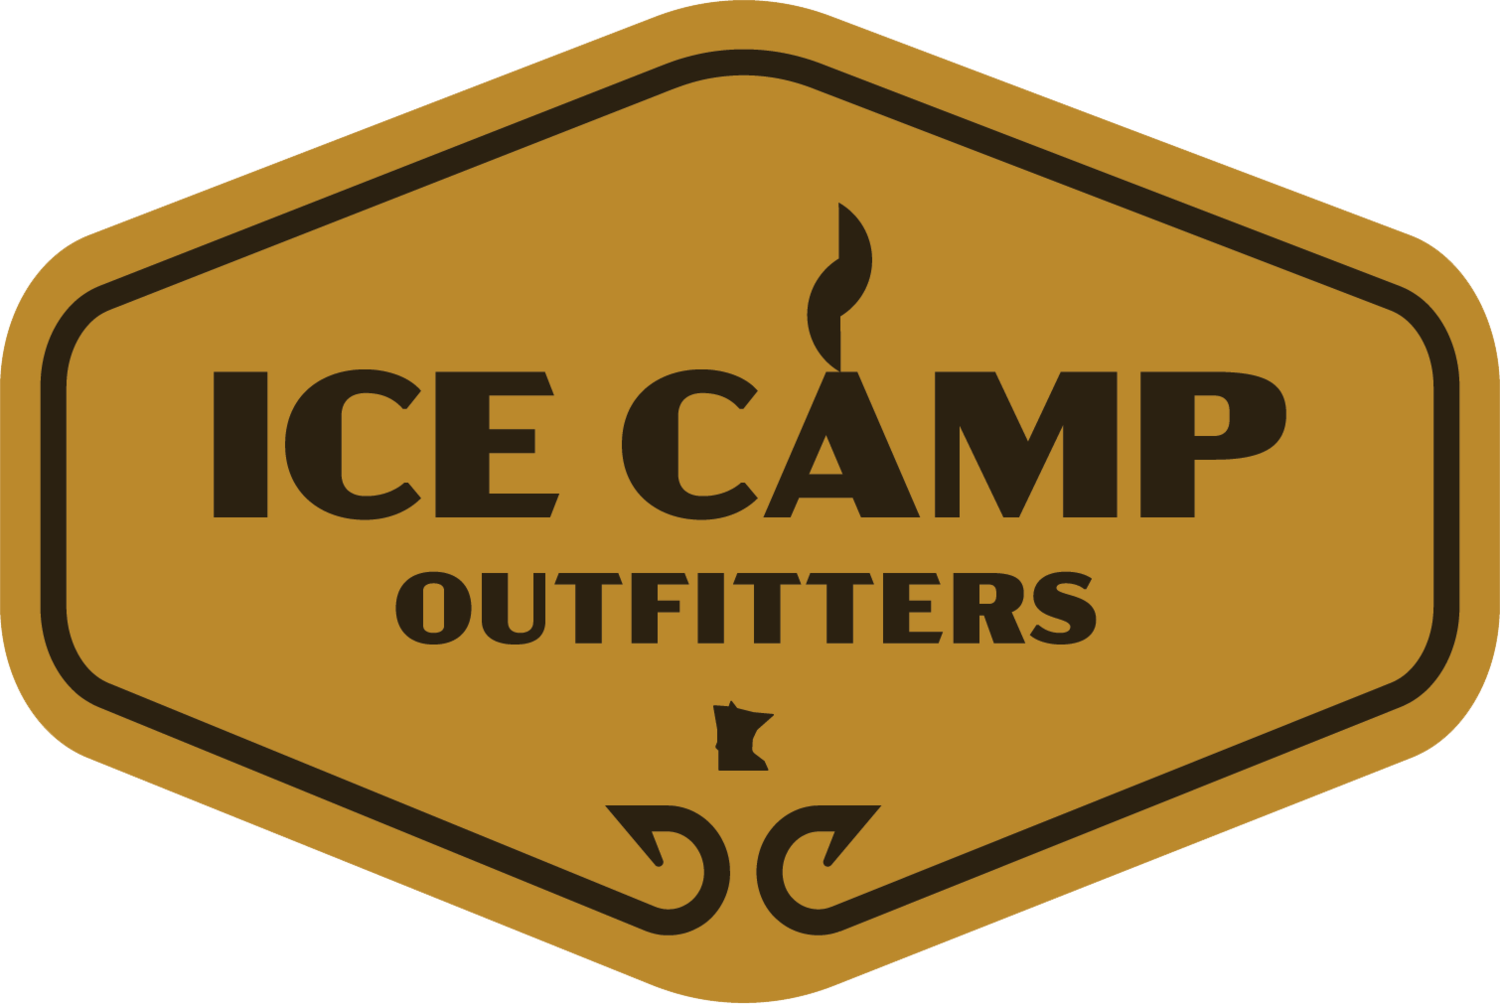 Ice Camp Outfitters